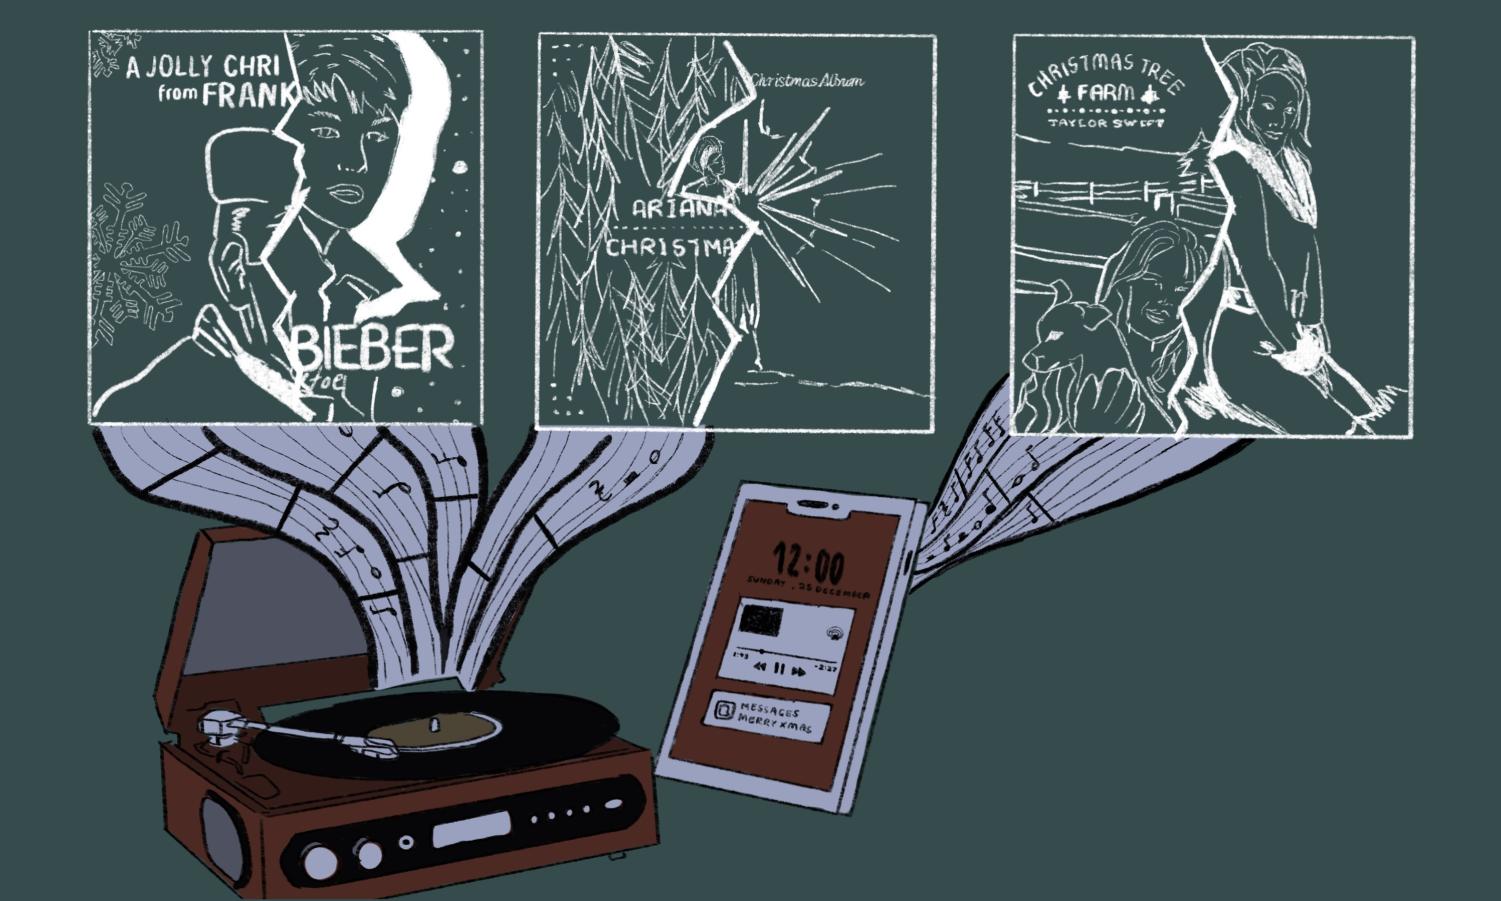 A+vinyl+record+player+and+smartphone+play+music+on+forest+green+background+connected+to+album+covers+with+wavy+music+staffs.